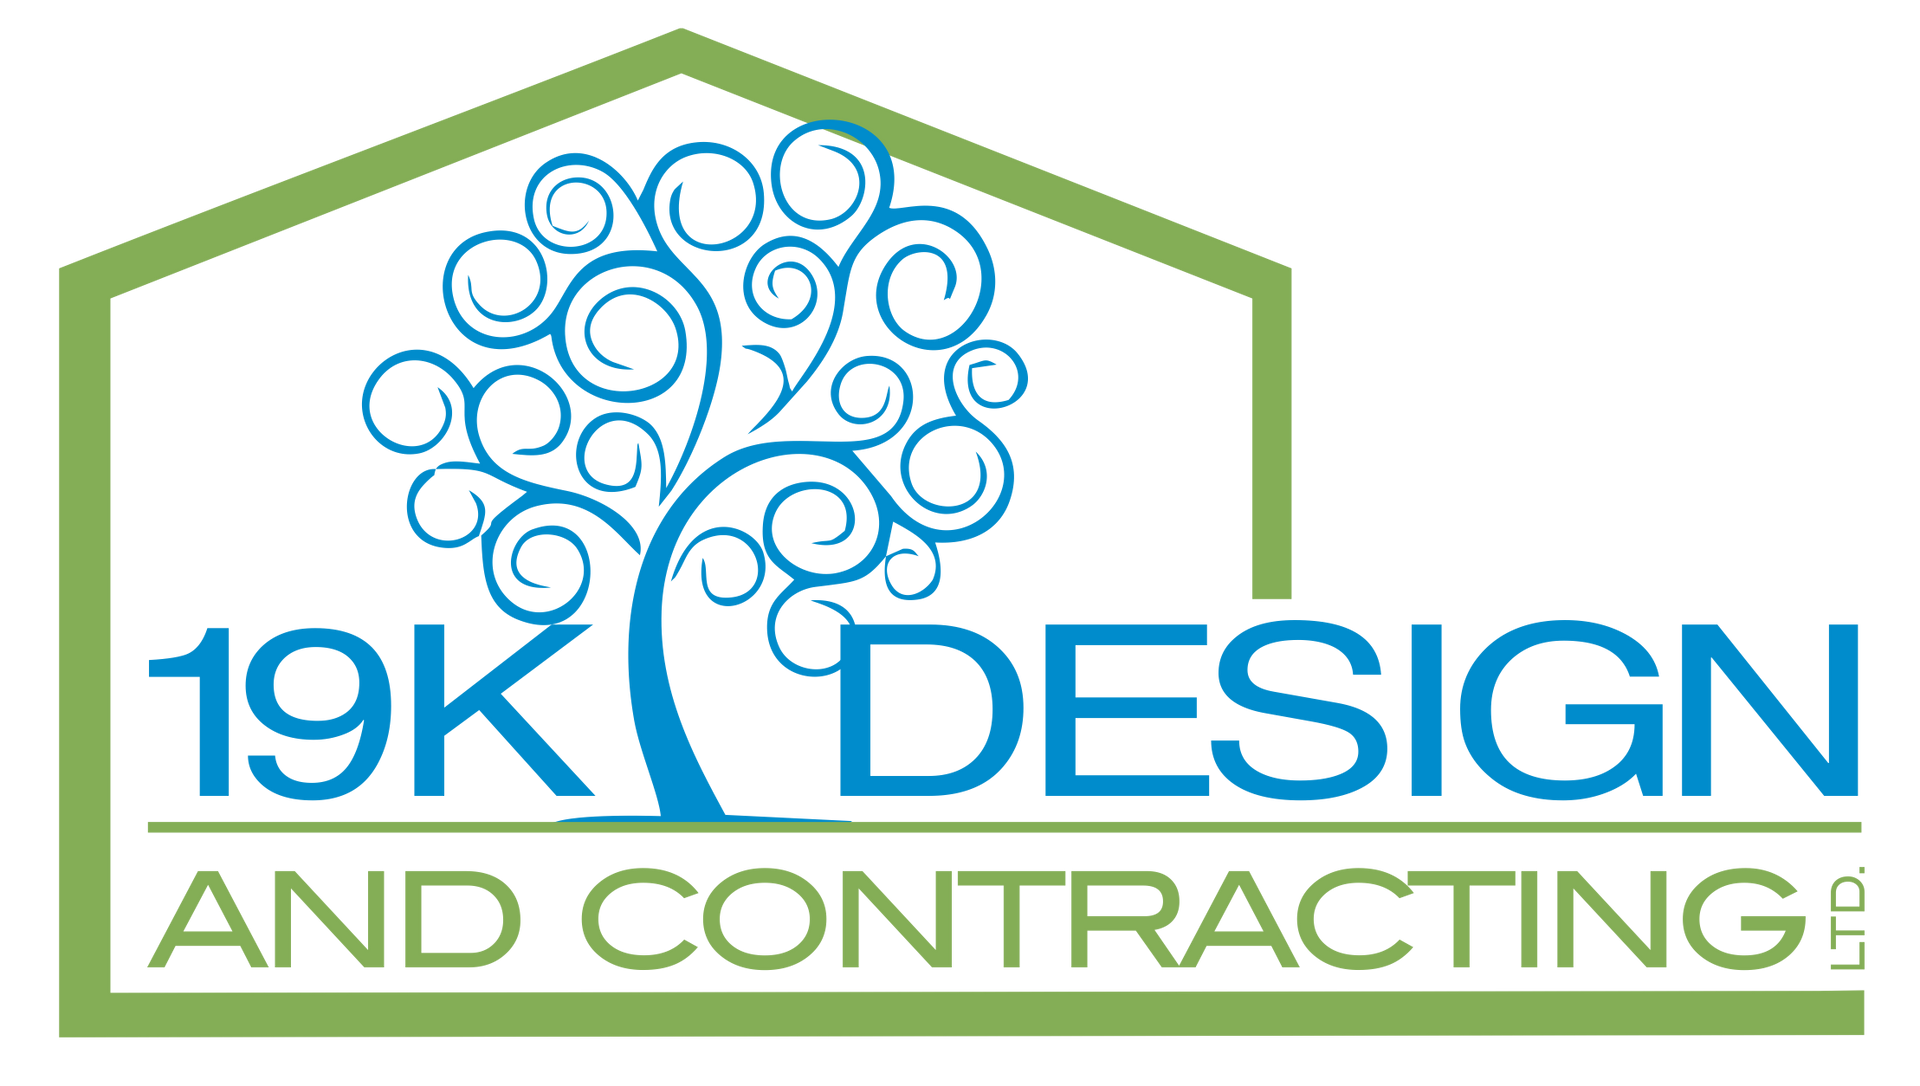 A logo for 19k design and contracting with a tree in the middle.